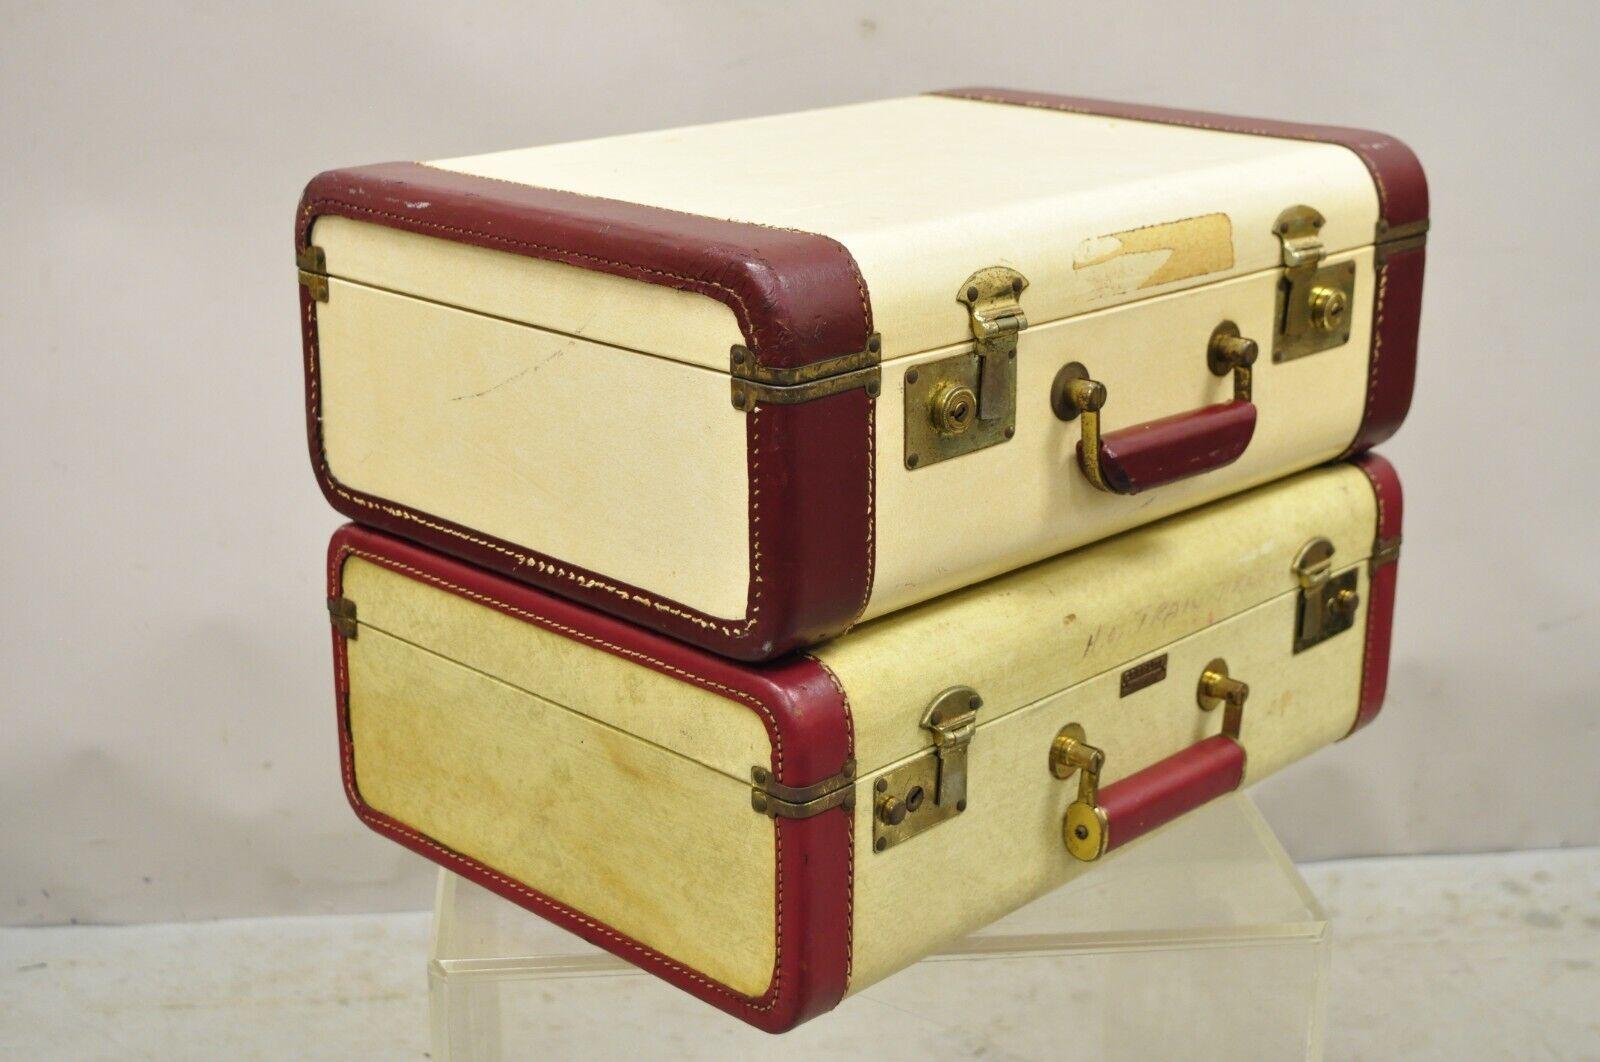 Vintage Horton & Hubbard Cari-Lite Hard Luggage Travel Suitcase - a Pair. Item features has a slight variation in color, hard frames, fitted interior, very nice vintage set, great style and form, no key, but unlocked, one with label. Circa Mid 20th